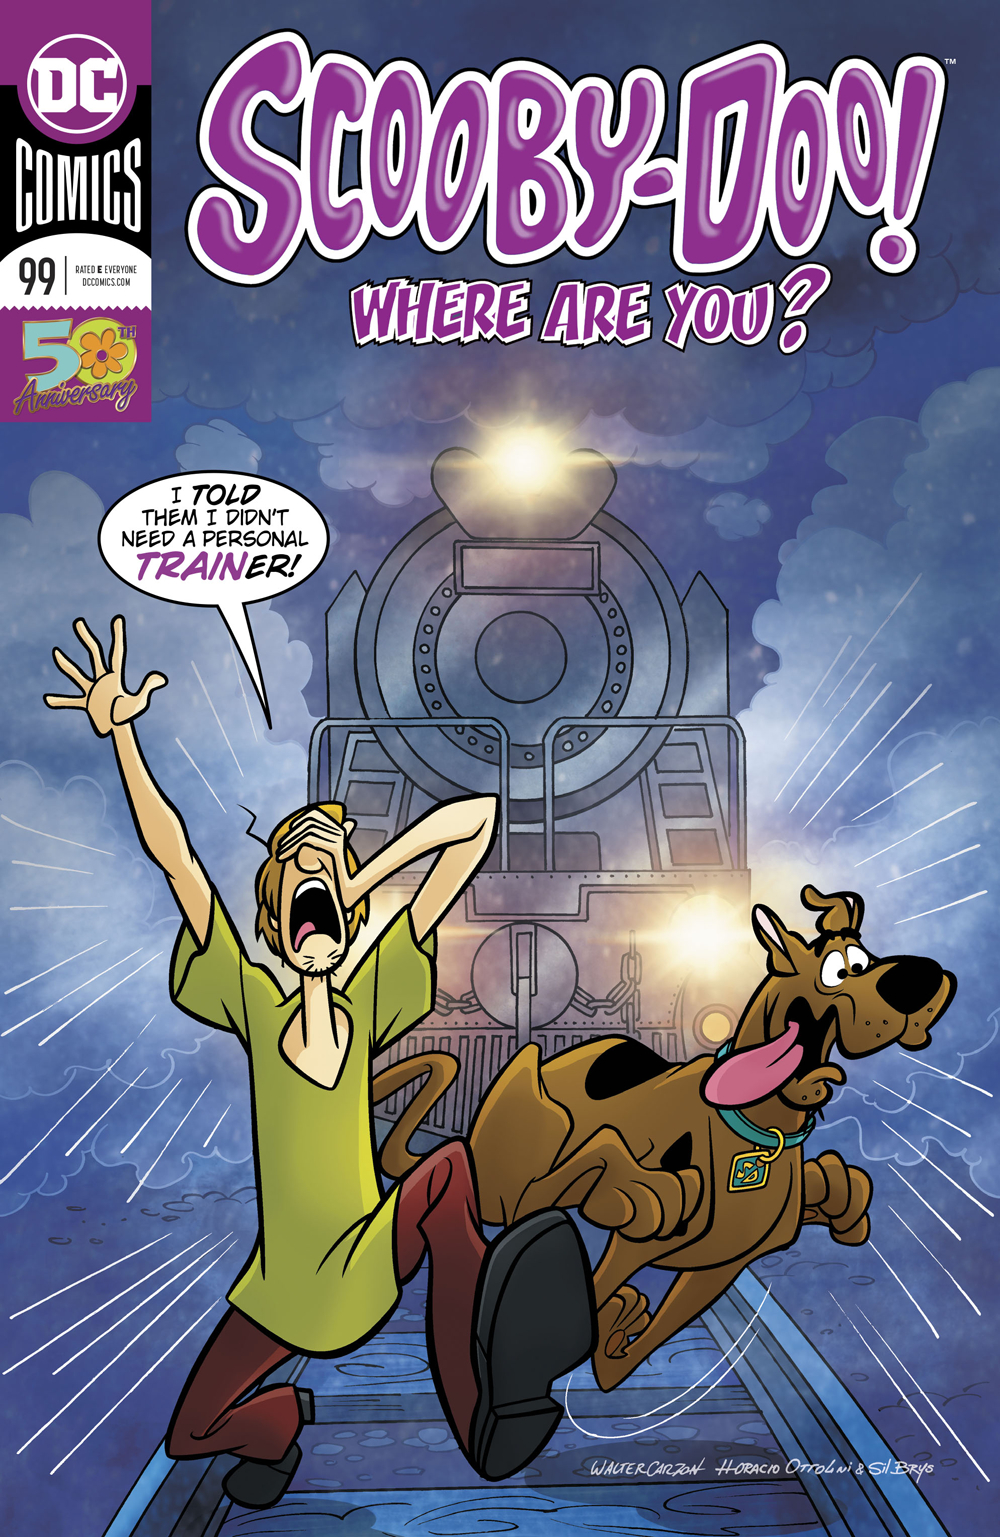 Scooby-Doo Where Are You? (2010) no. 99 - Used